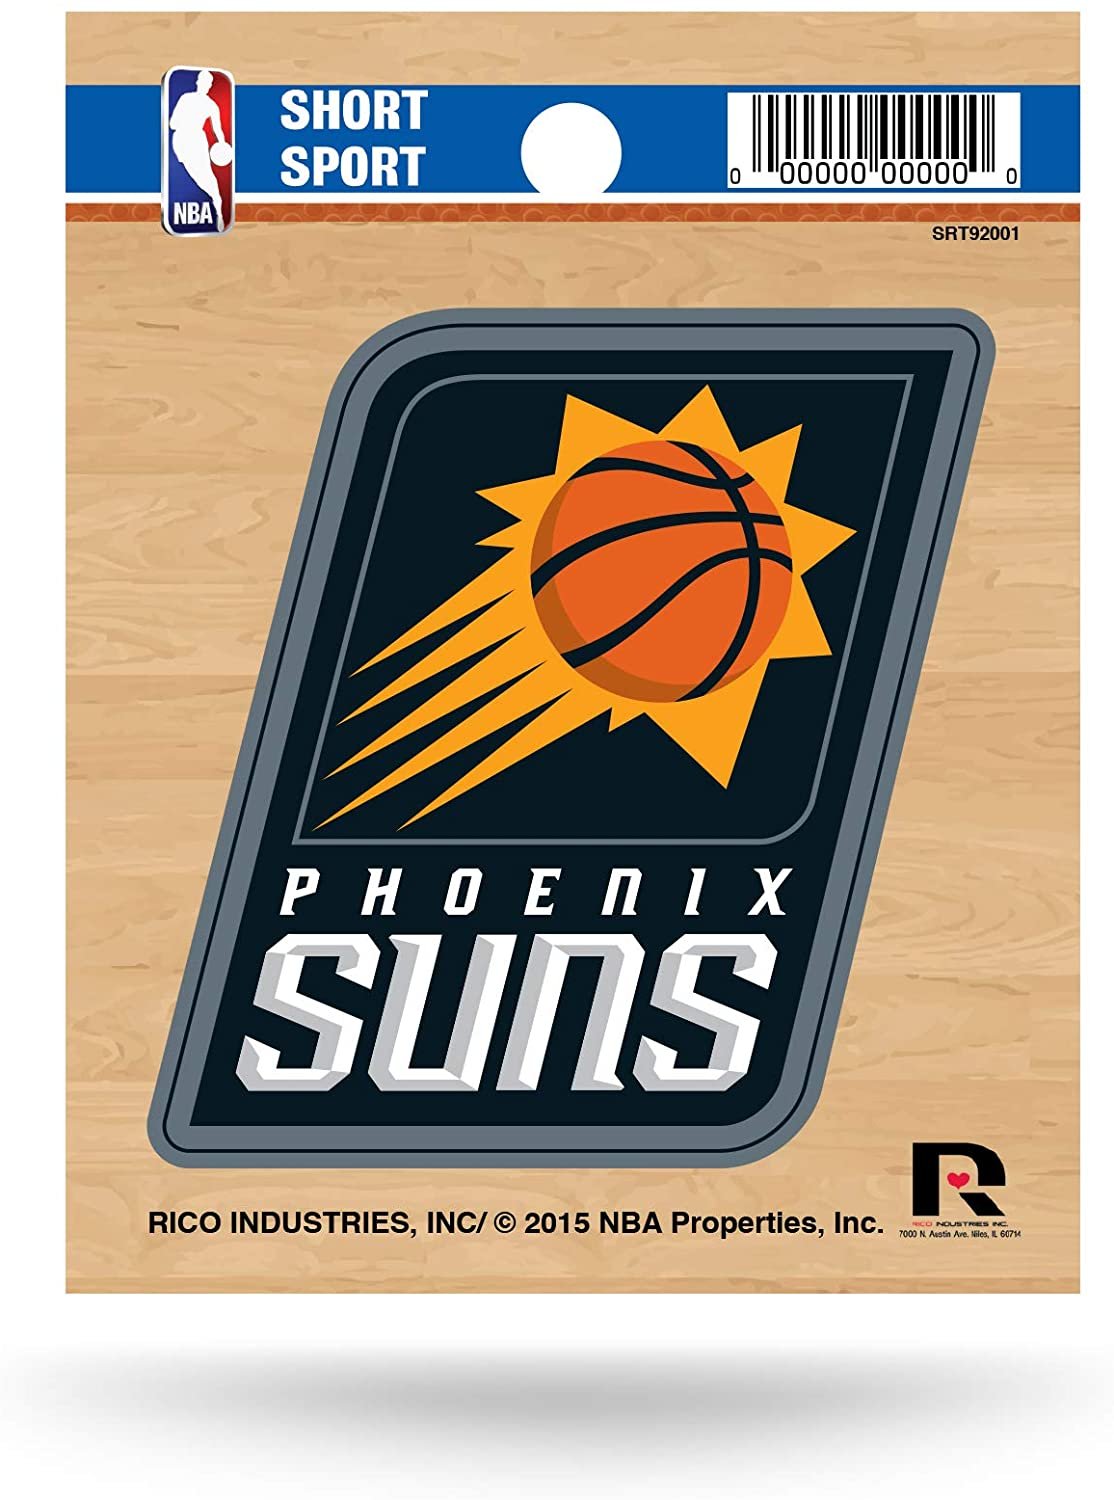 Phoenix Suns 3 Inch Sticker Decal, Full Adhesive Backing, Easy Peel and Stick Application